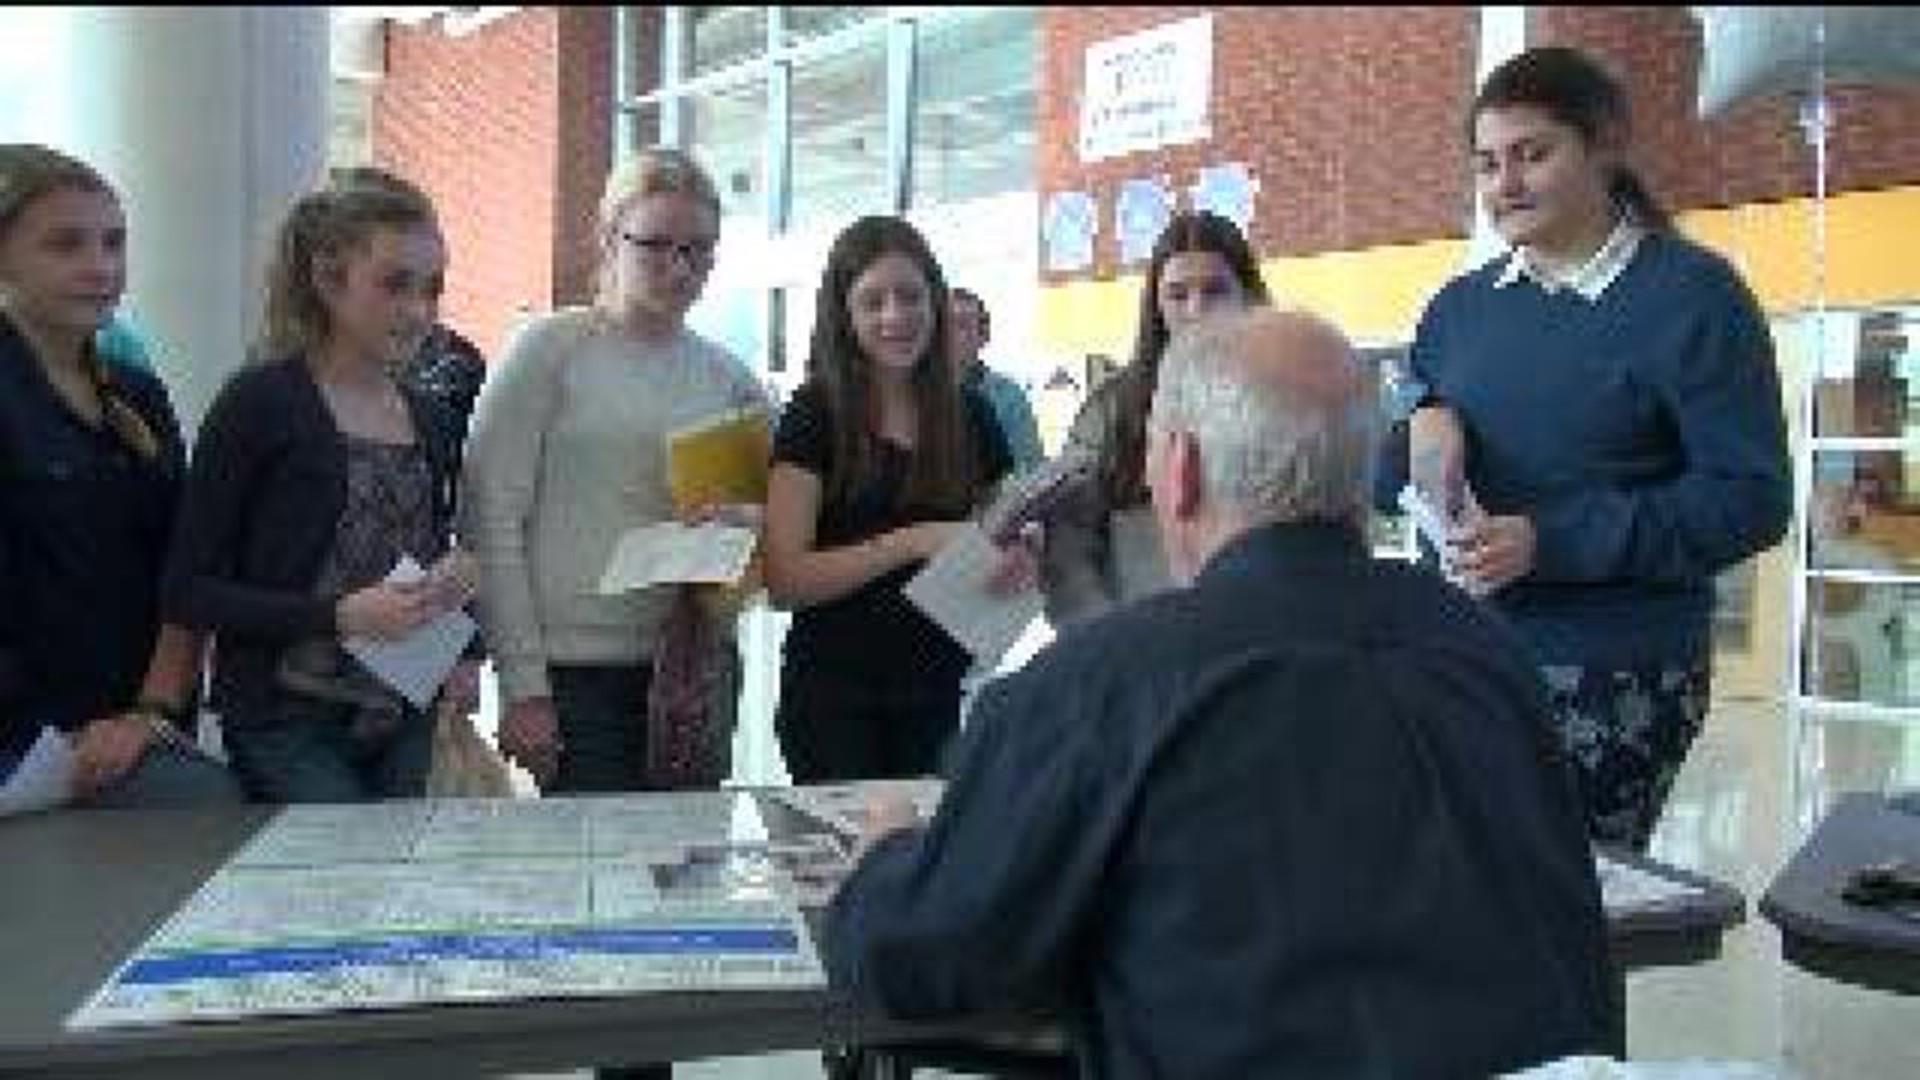 Career Fair For High School Students in Dallas Twp.